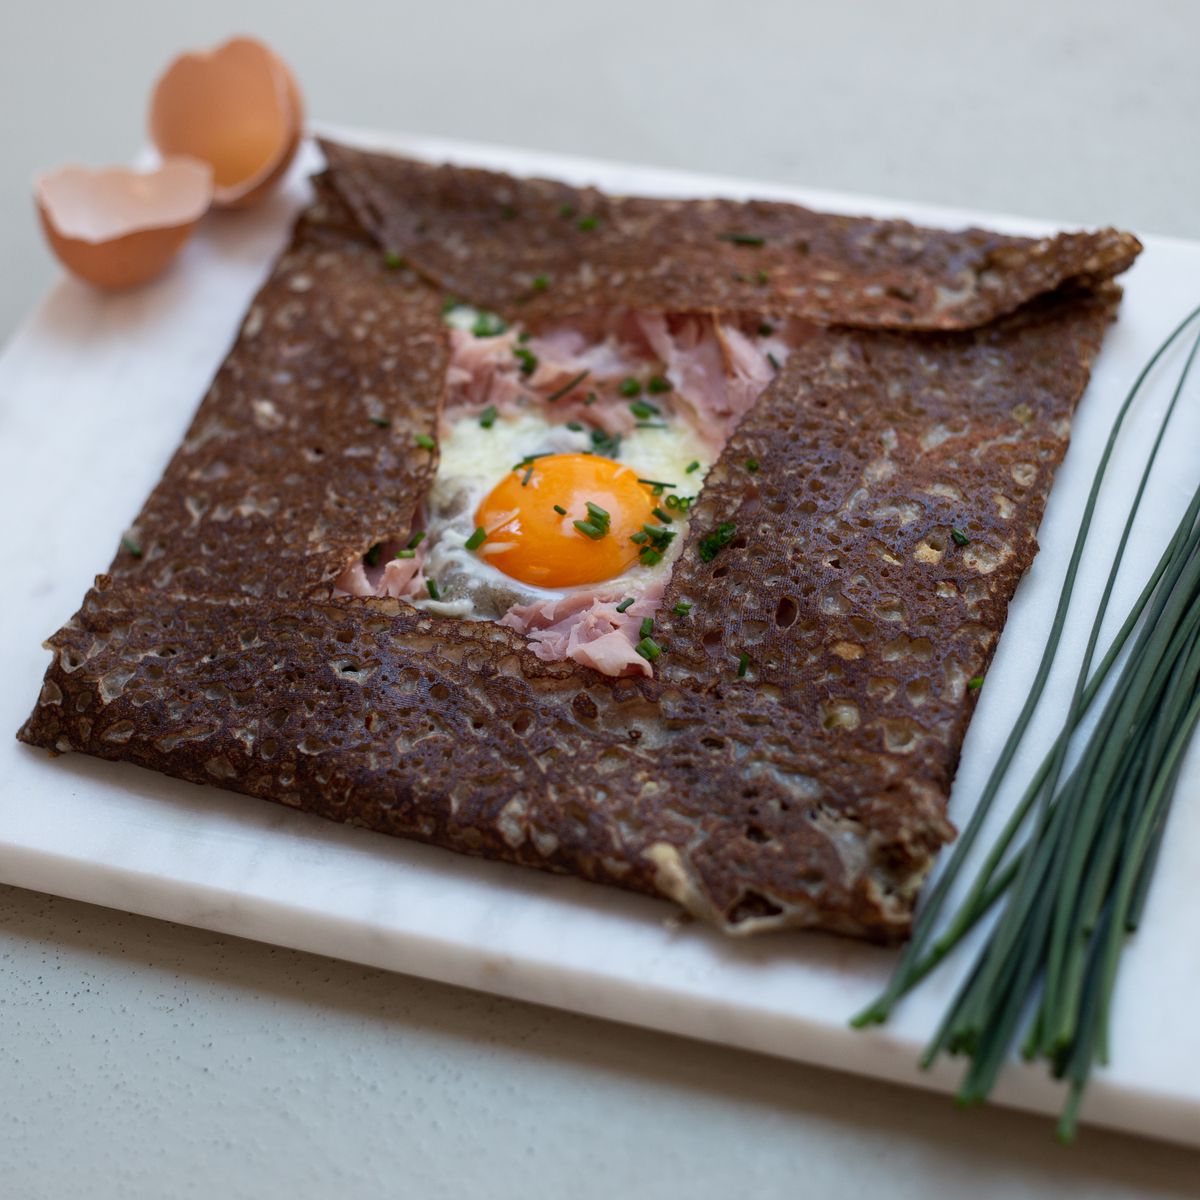 A buckwheat crepe with an egg peaking out in the center. 